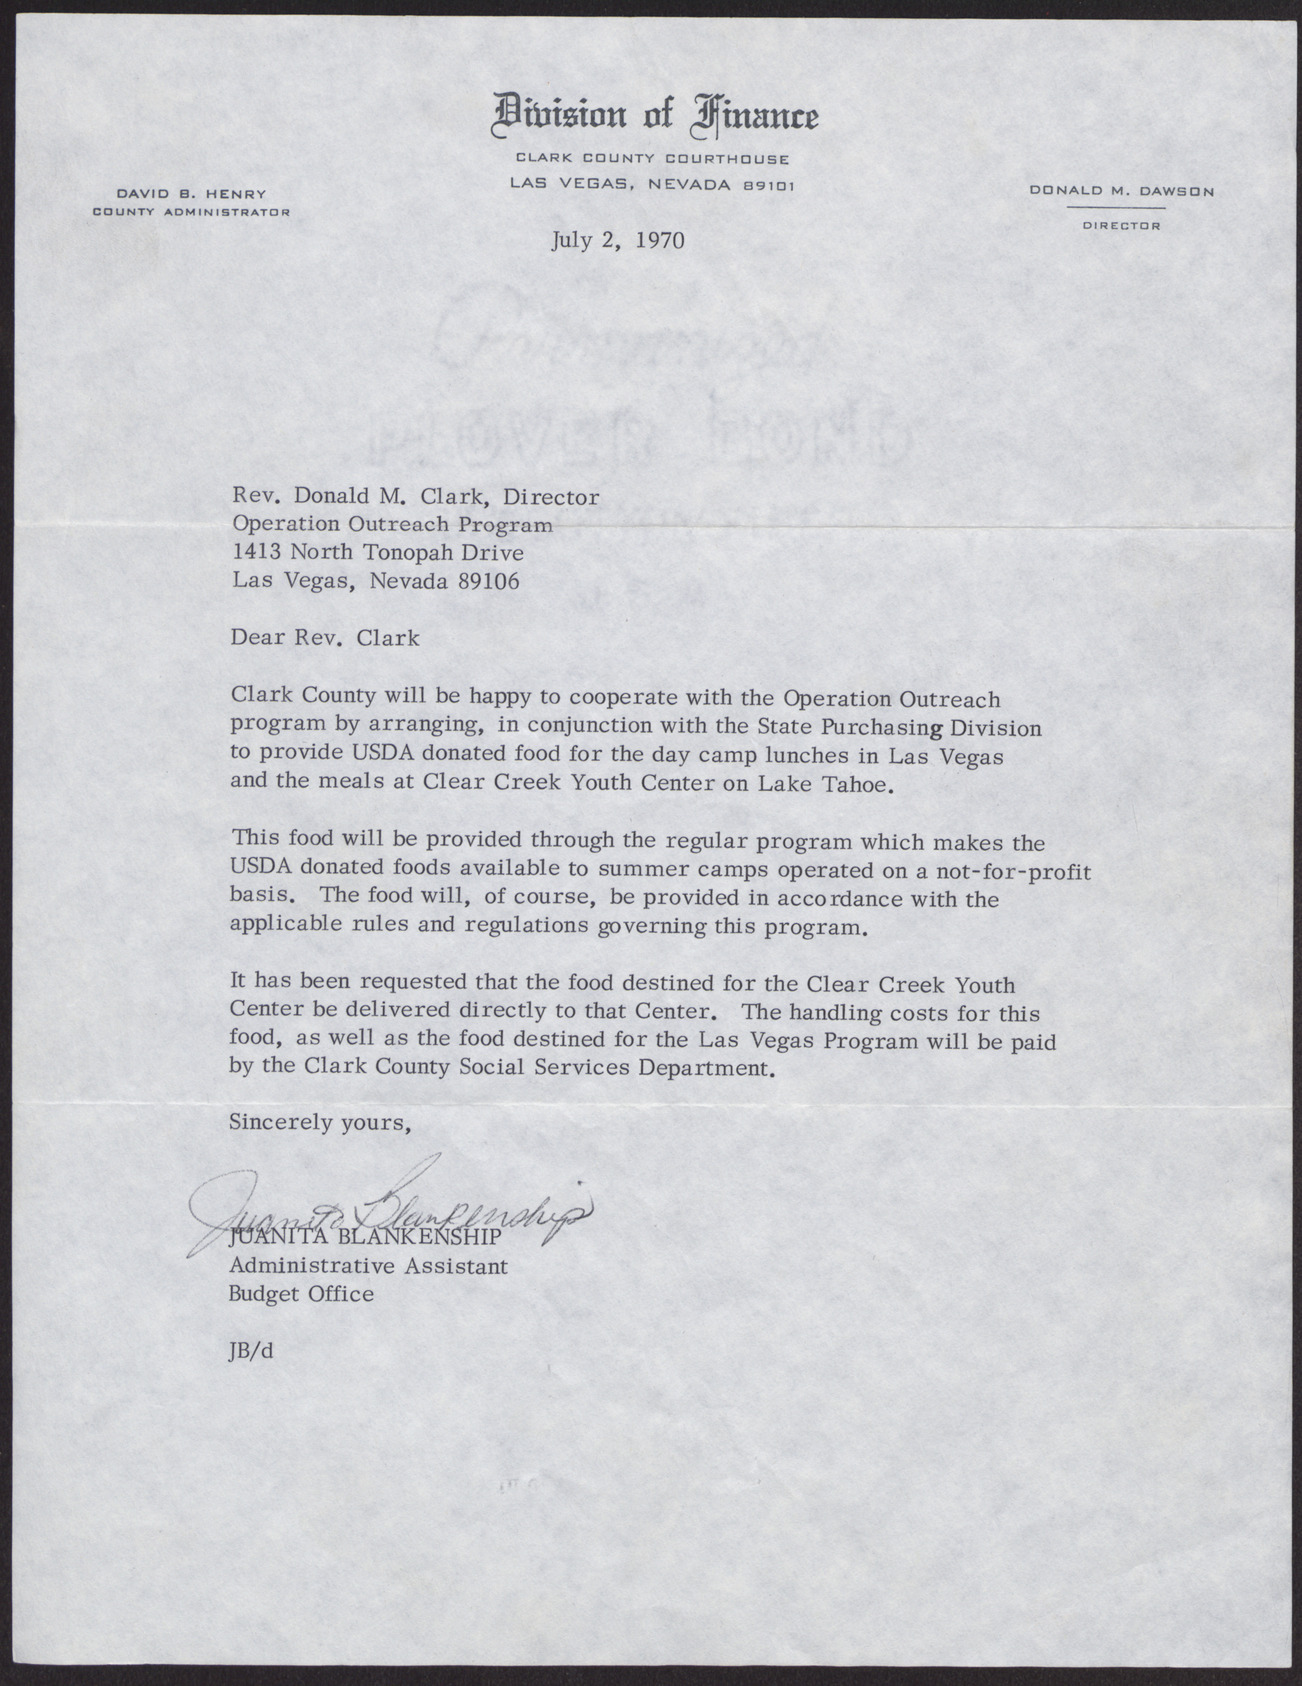 Letter to Reverend Donald Clark from Vincent Fallon, July 9, 1970